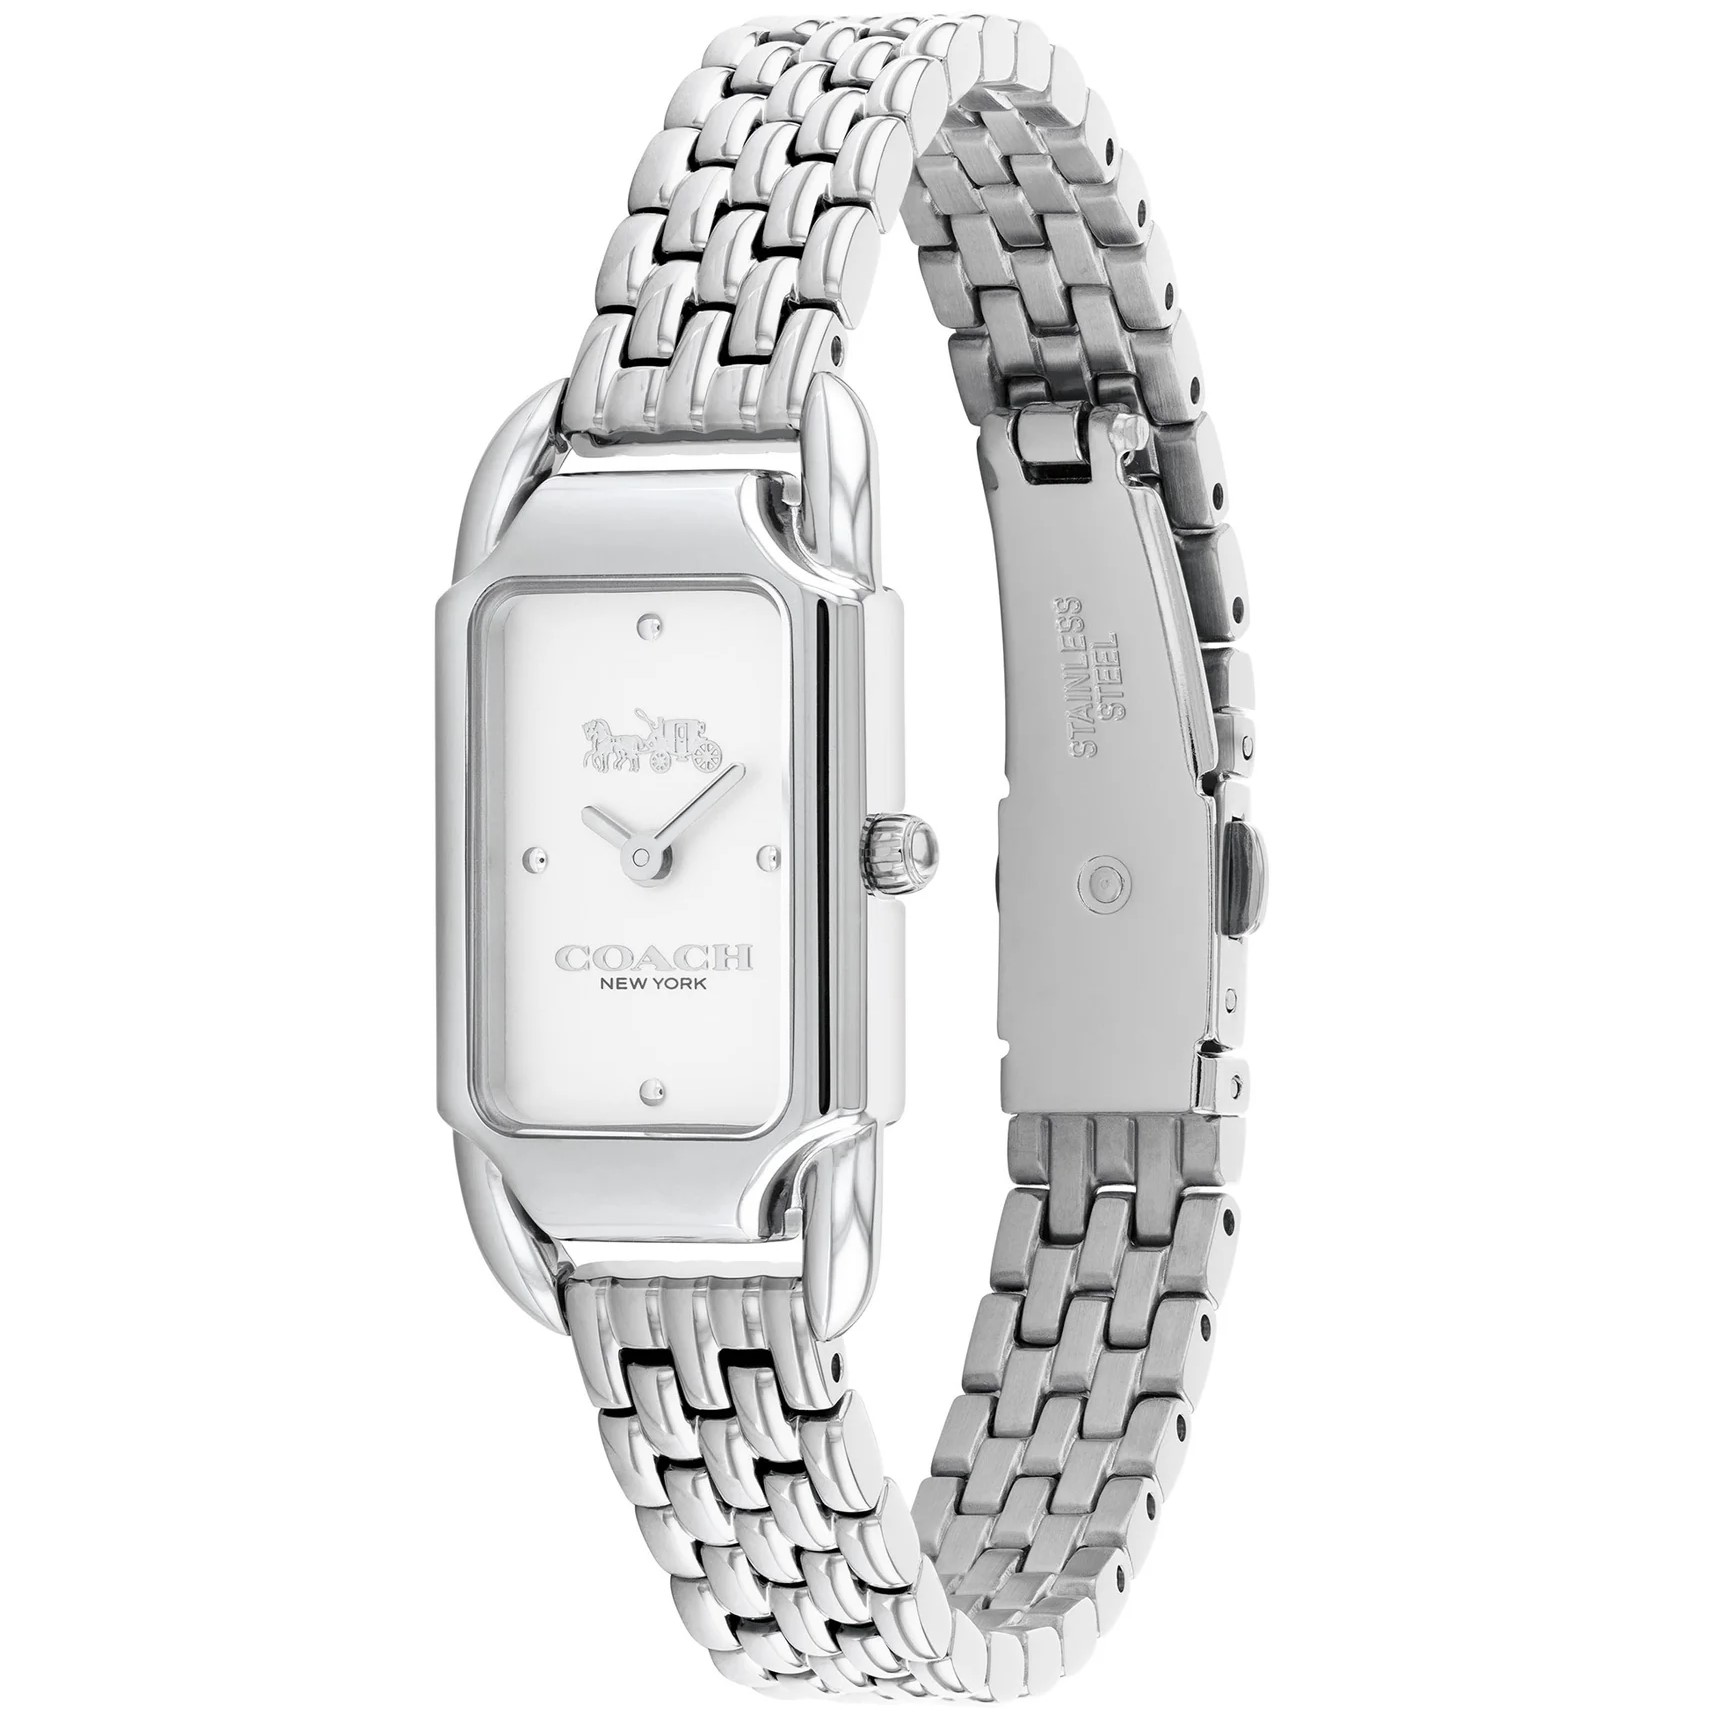 ĐỒNG HỒ ĐEO TAY NỮ COACH CADIE SILVER STAINLESS STEEL WHITE DIAL WOMENS WATCH 14504035 3